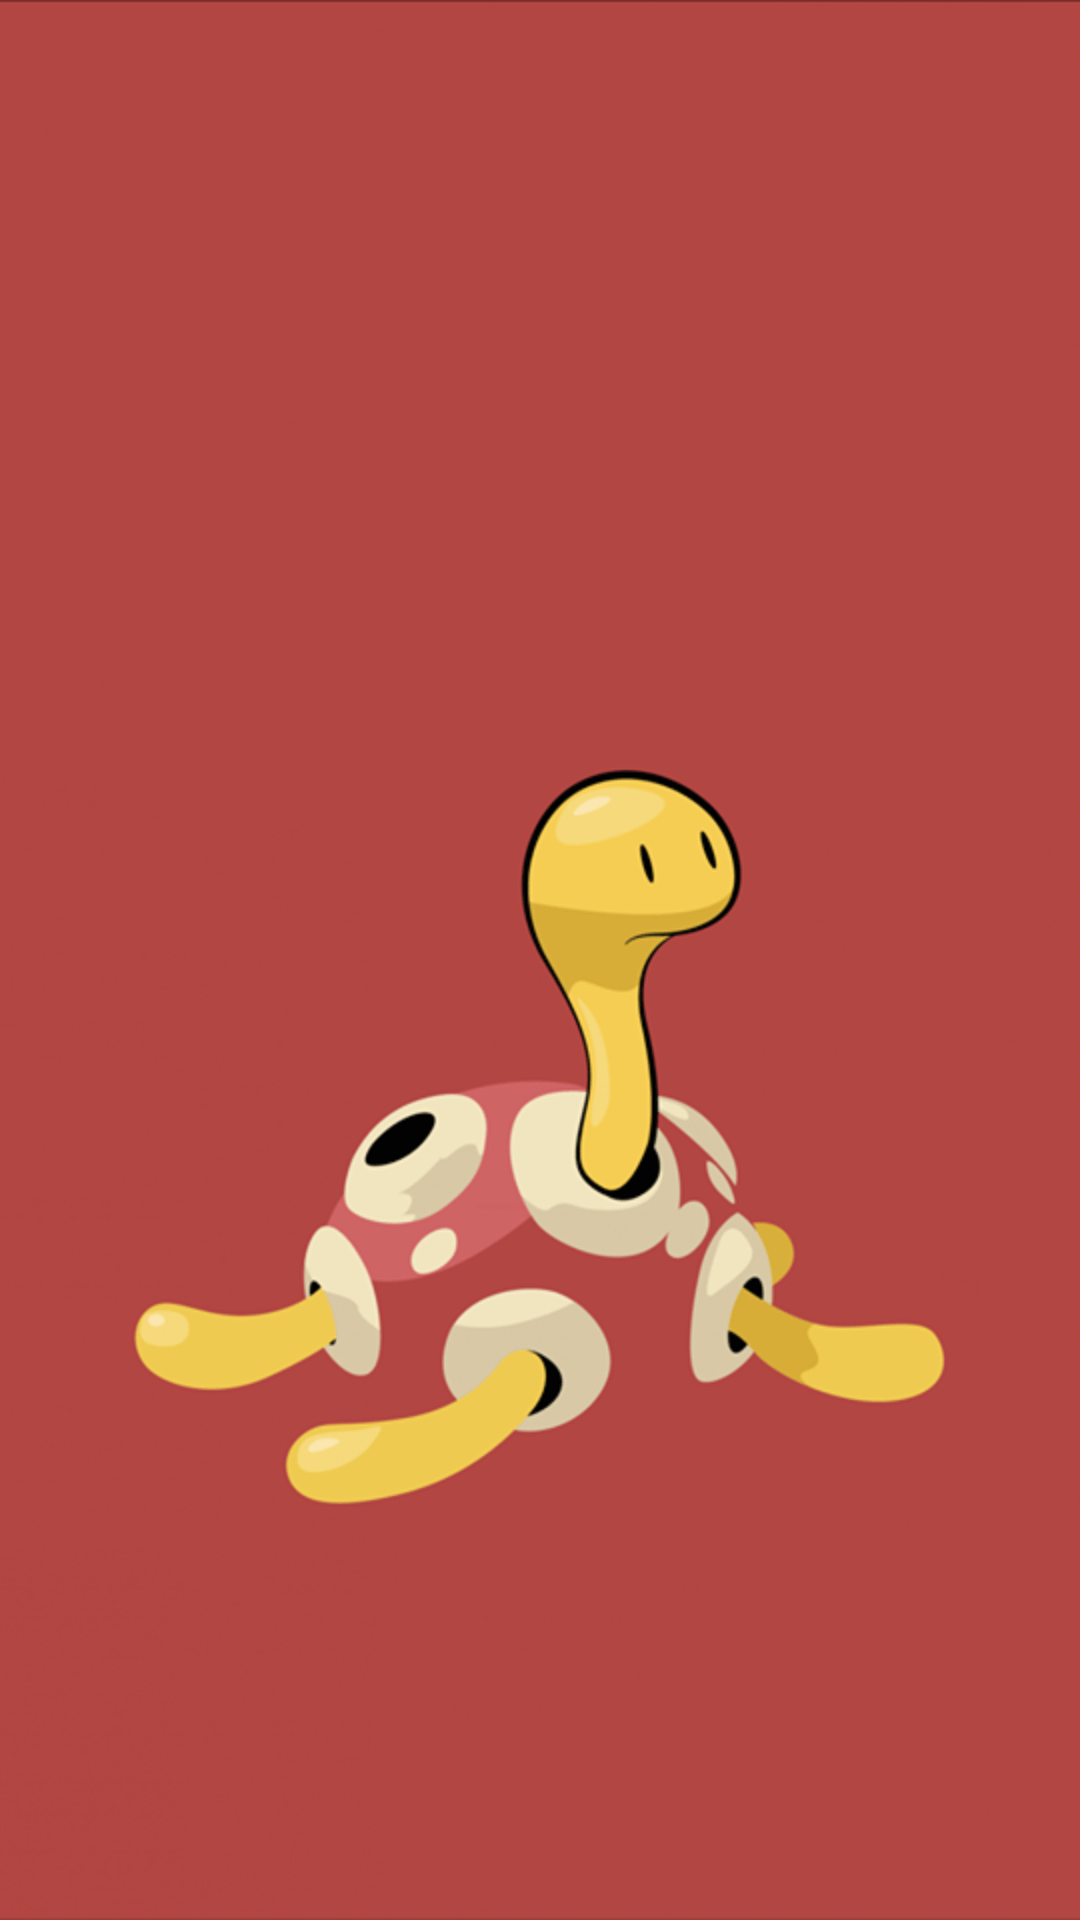 Shuckle to see more of the cutest cartoon characters